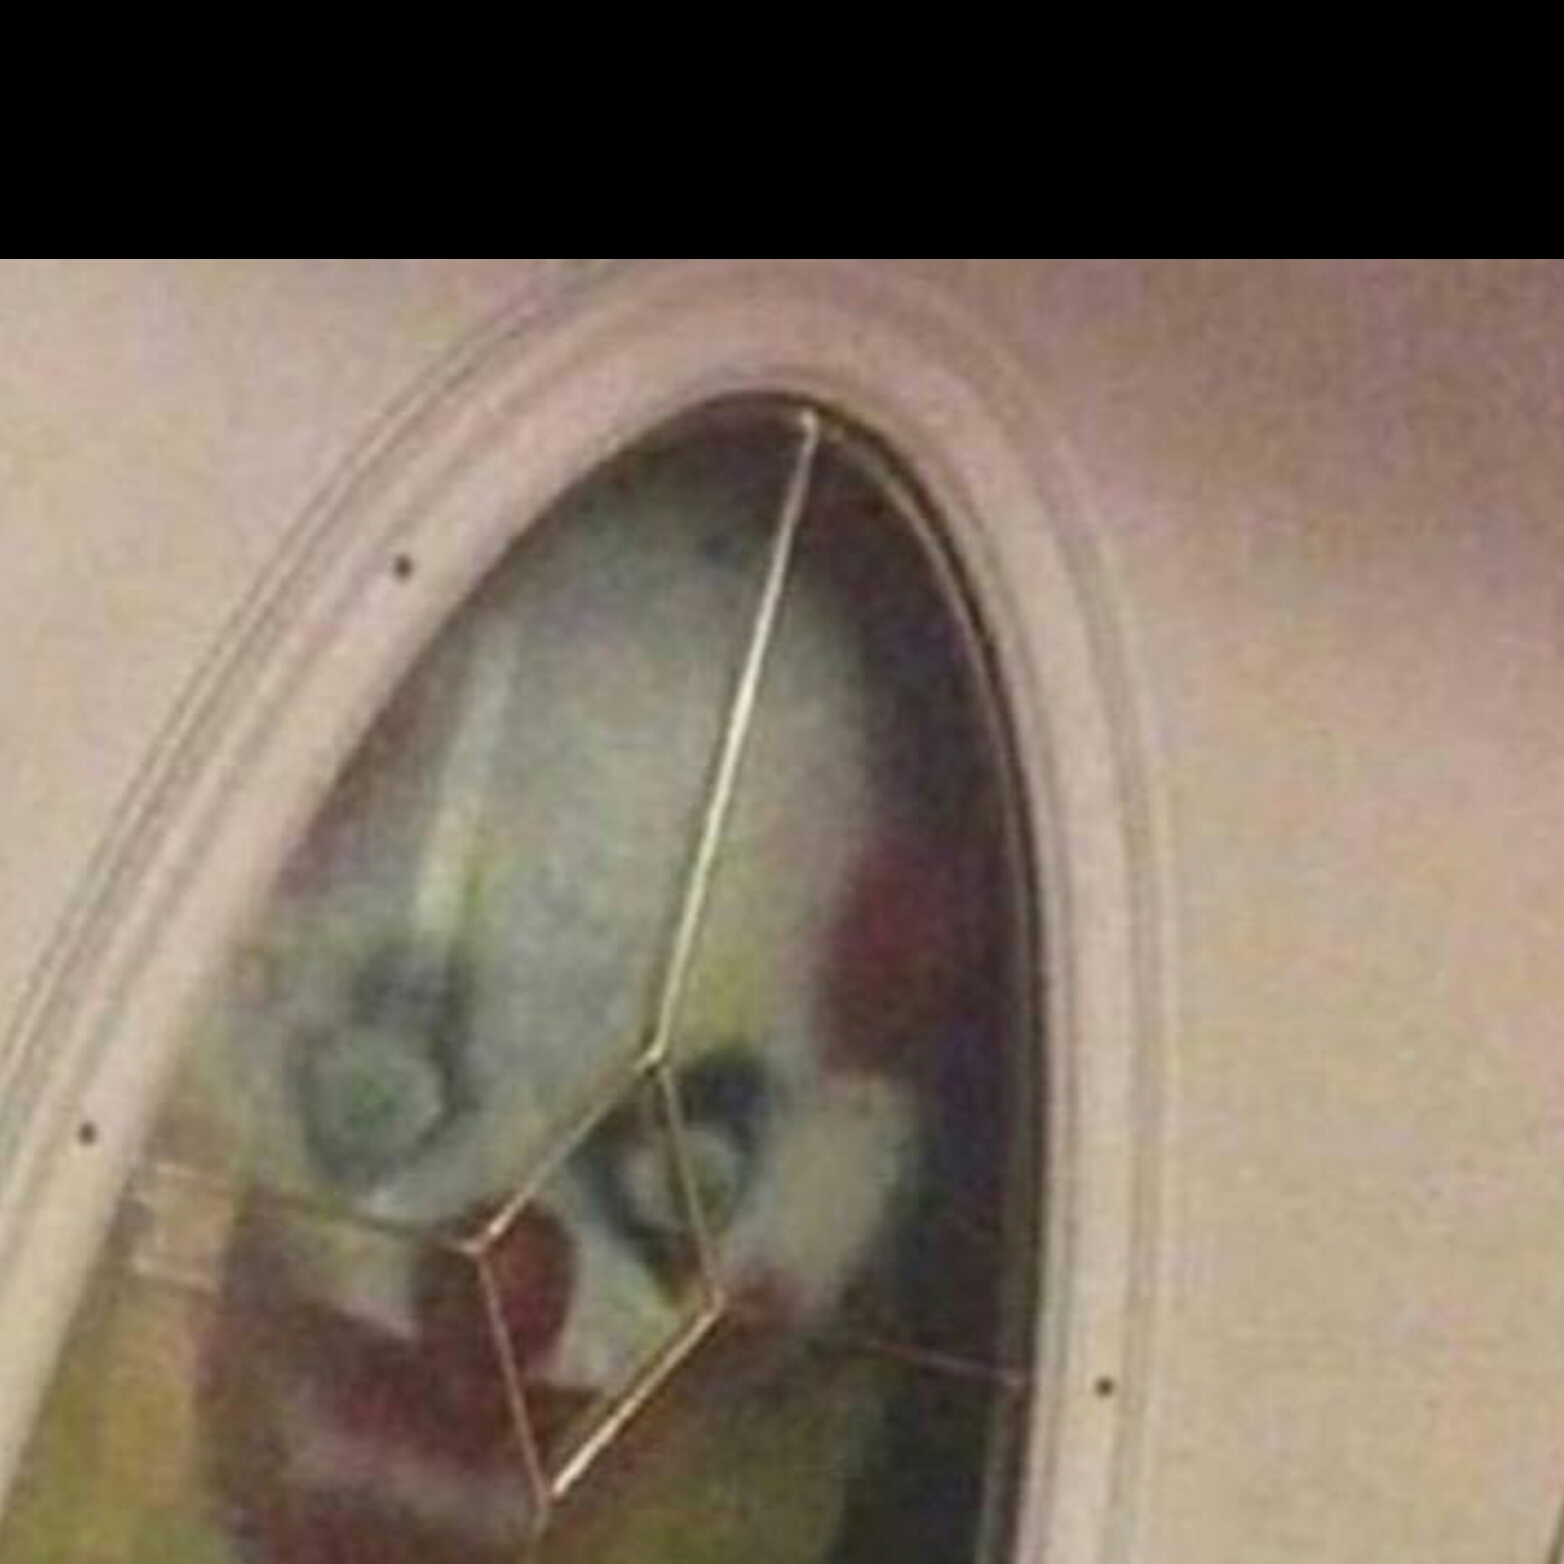 High Quality clown at the door Blank Meme Template